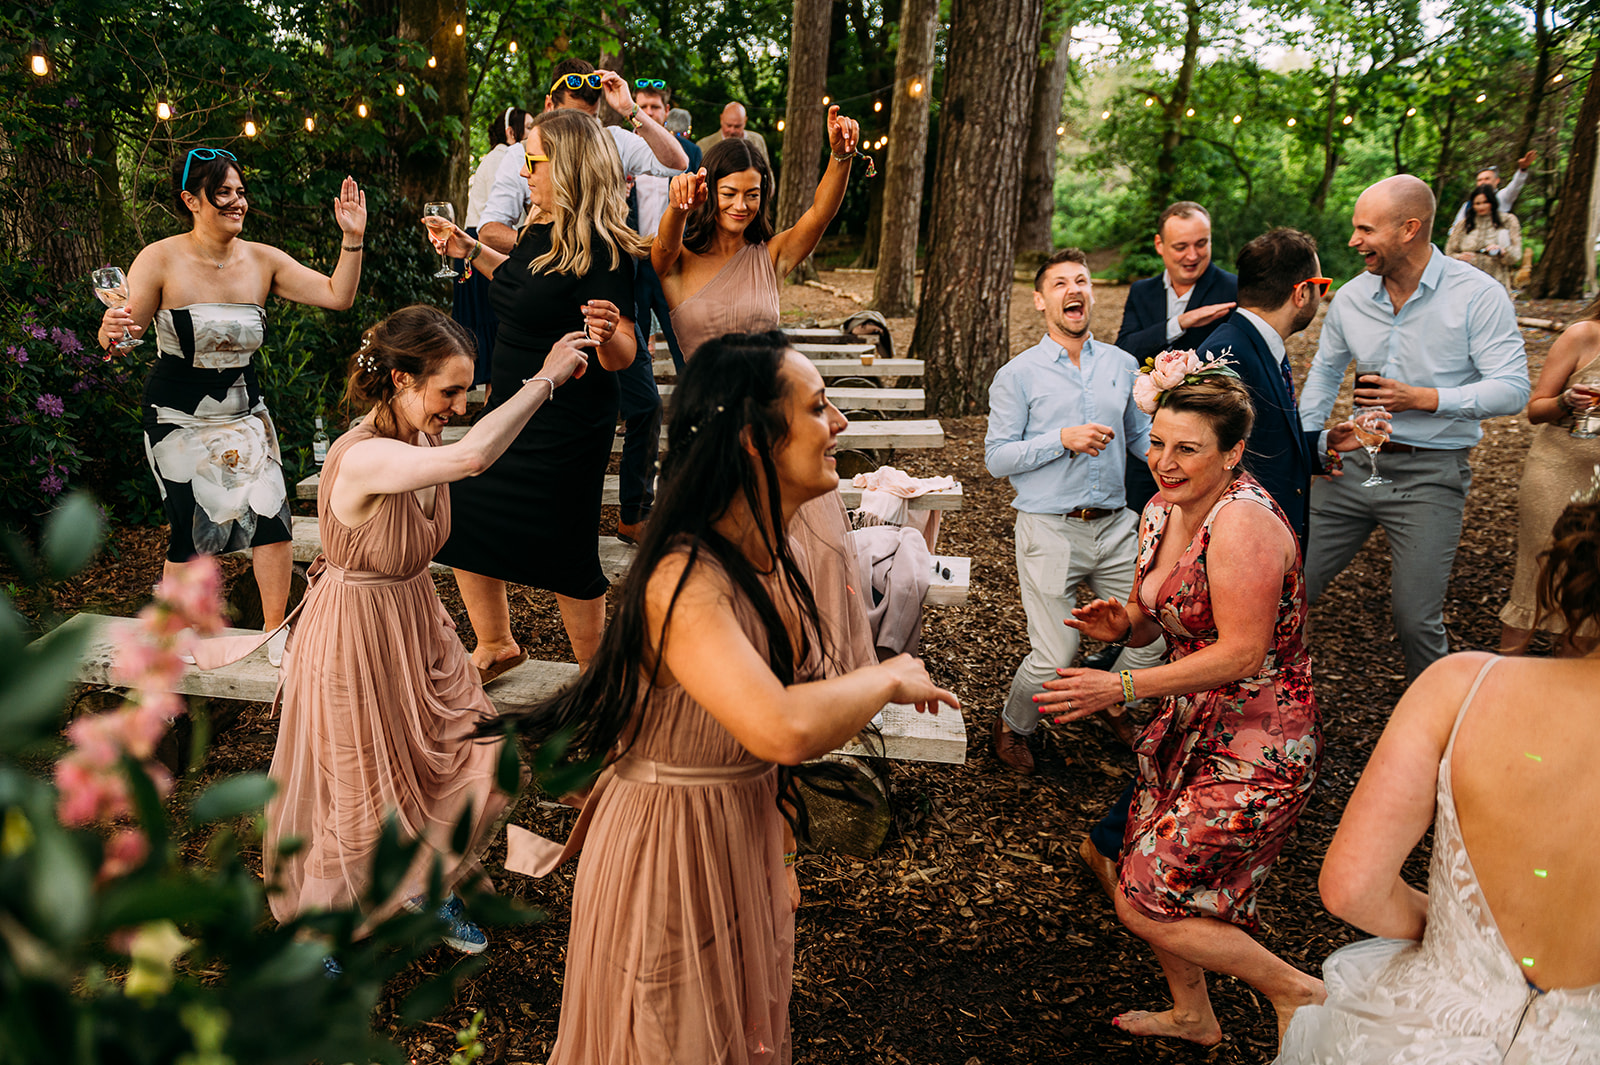 Dancing in the woods at Hobbit Hill.